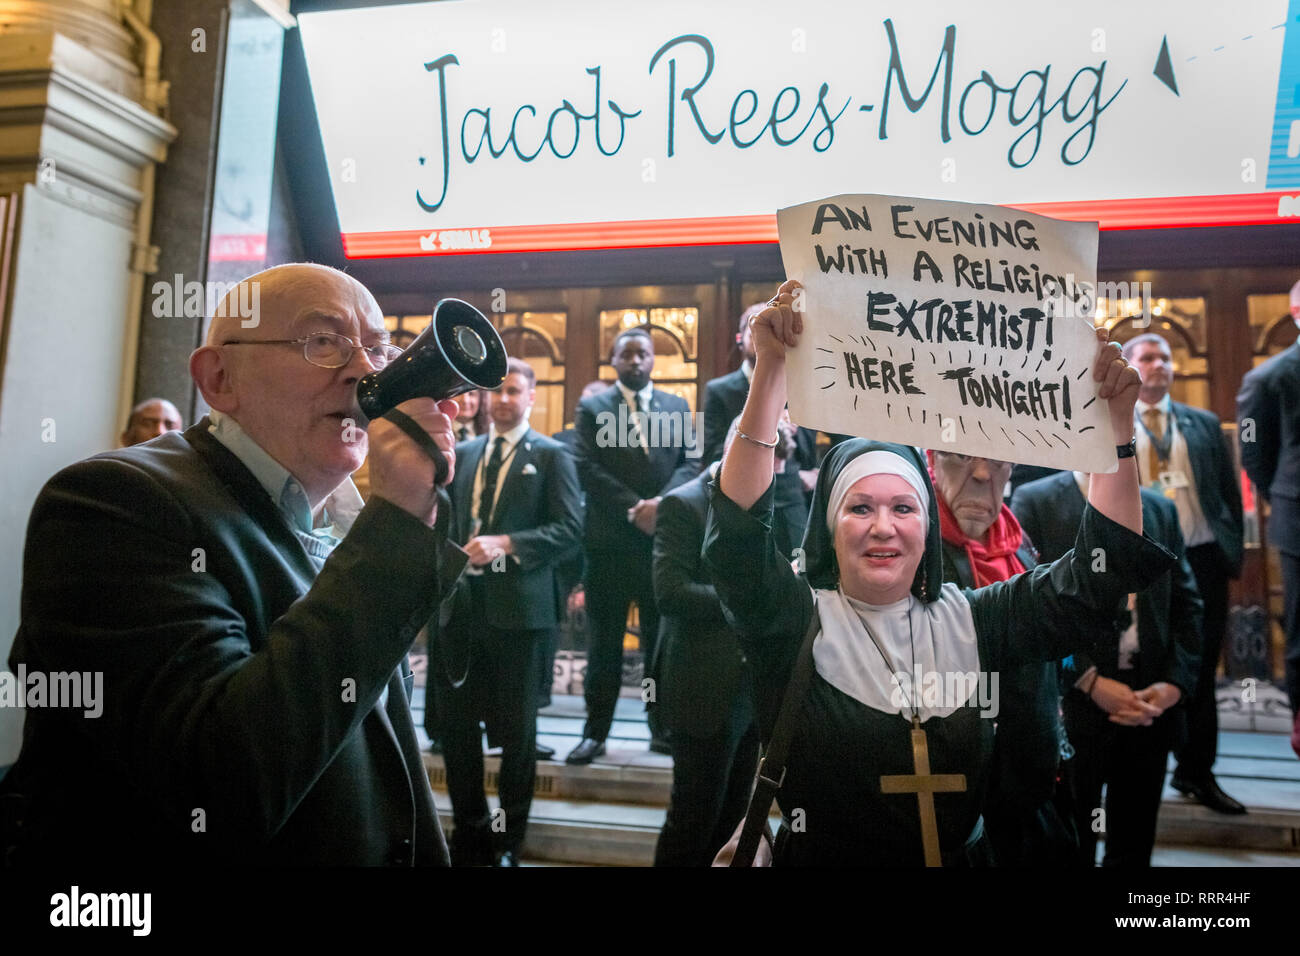 Protesters from Class War anarchist group hold a lively demonstration outside the London Palladium theatre against the evening talk featuring Jacob Rees-Mogg, Conservative MP and prominent Brexit supporter. Class War members, including long-time anarchist, Ian Bone (pictured with megaphone), Jane Nicholl (pictured dressed as a nun) and Adam Clifford (as Rees-Mogg parody) claim Mr Rees-Mogg, a Catholic, is a religious extremist because of his outspoken views on abortion. London, UK. Stock Photo